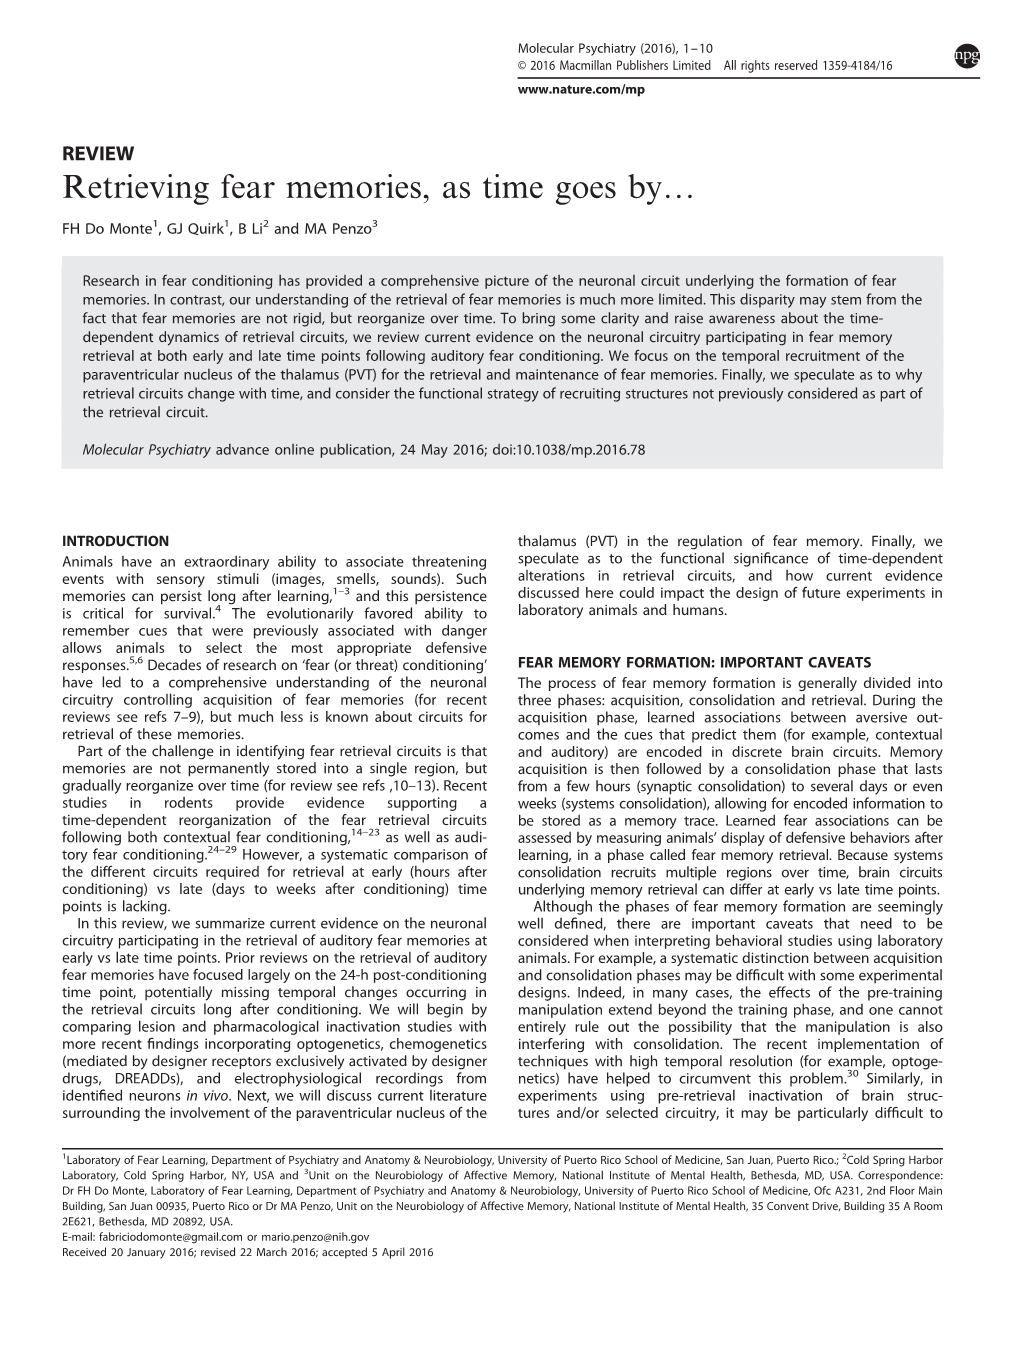 Retrieving Fear Memories, As Time Goes By&Mldr;